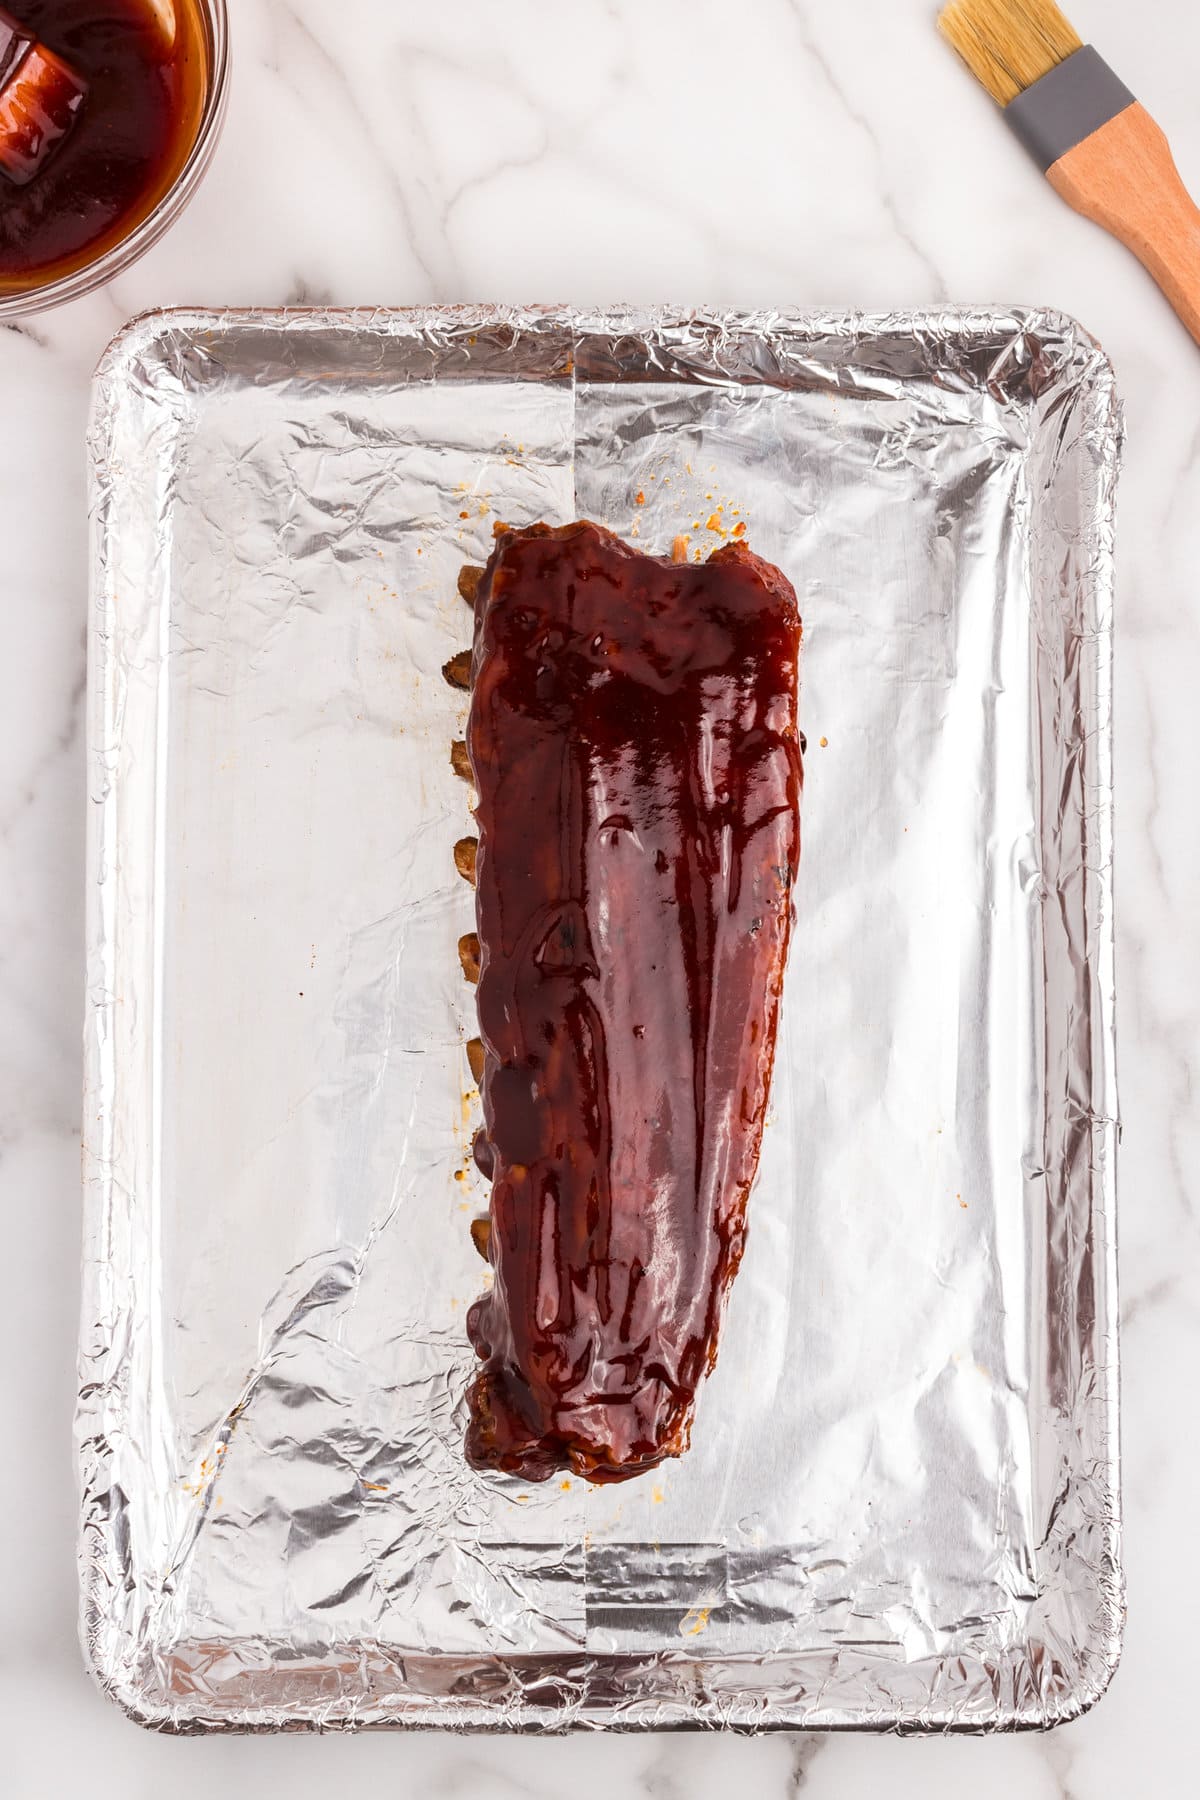 Oven Baked Ribs brushed with BBQ sauce on tinfoil-lined baking sheet